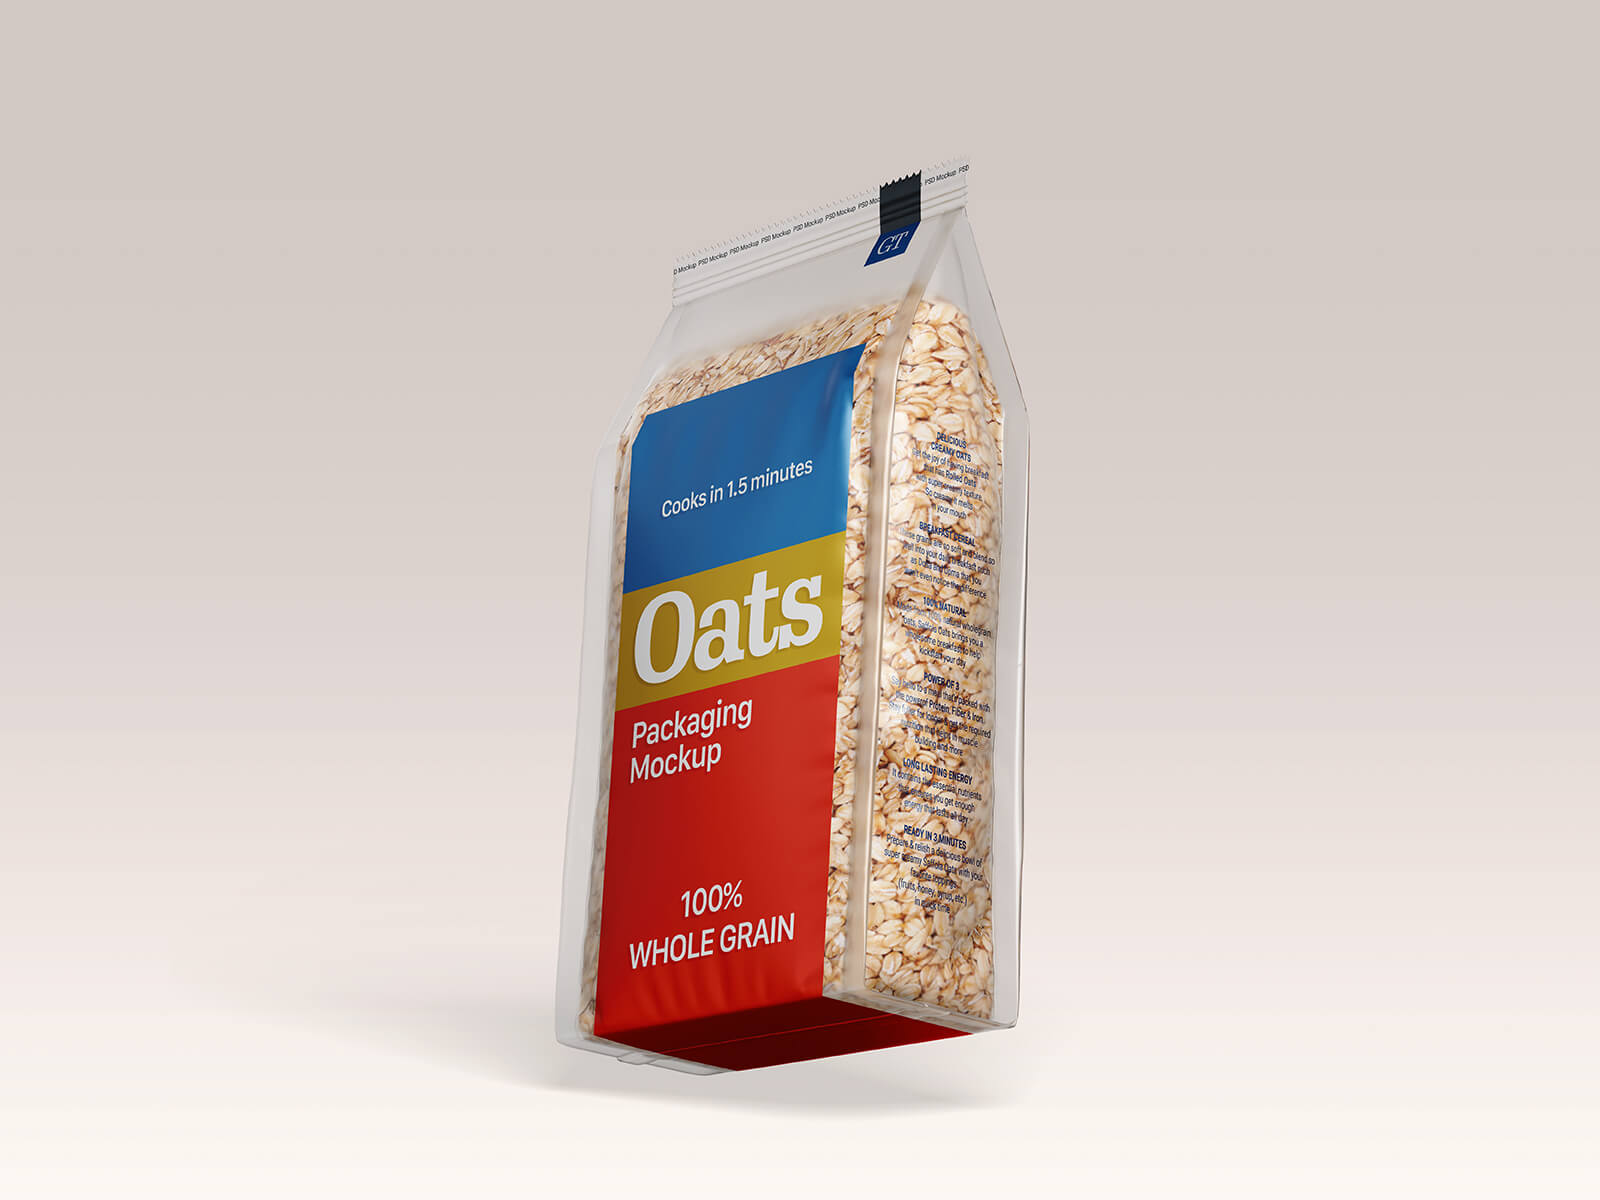 Free Oats Stand-Up Pouch Packaging Mockup PSD Set